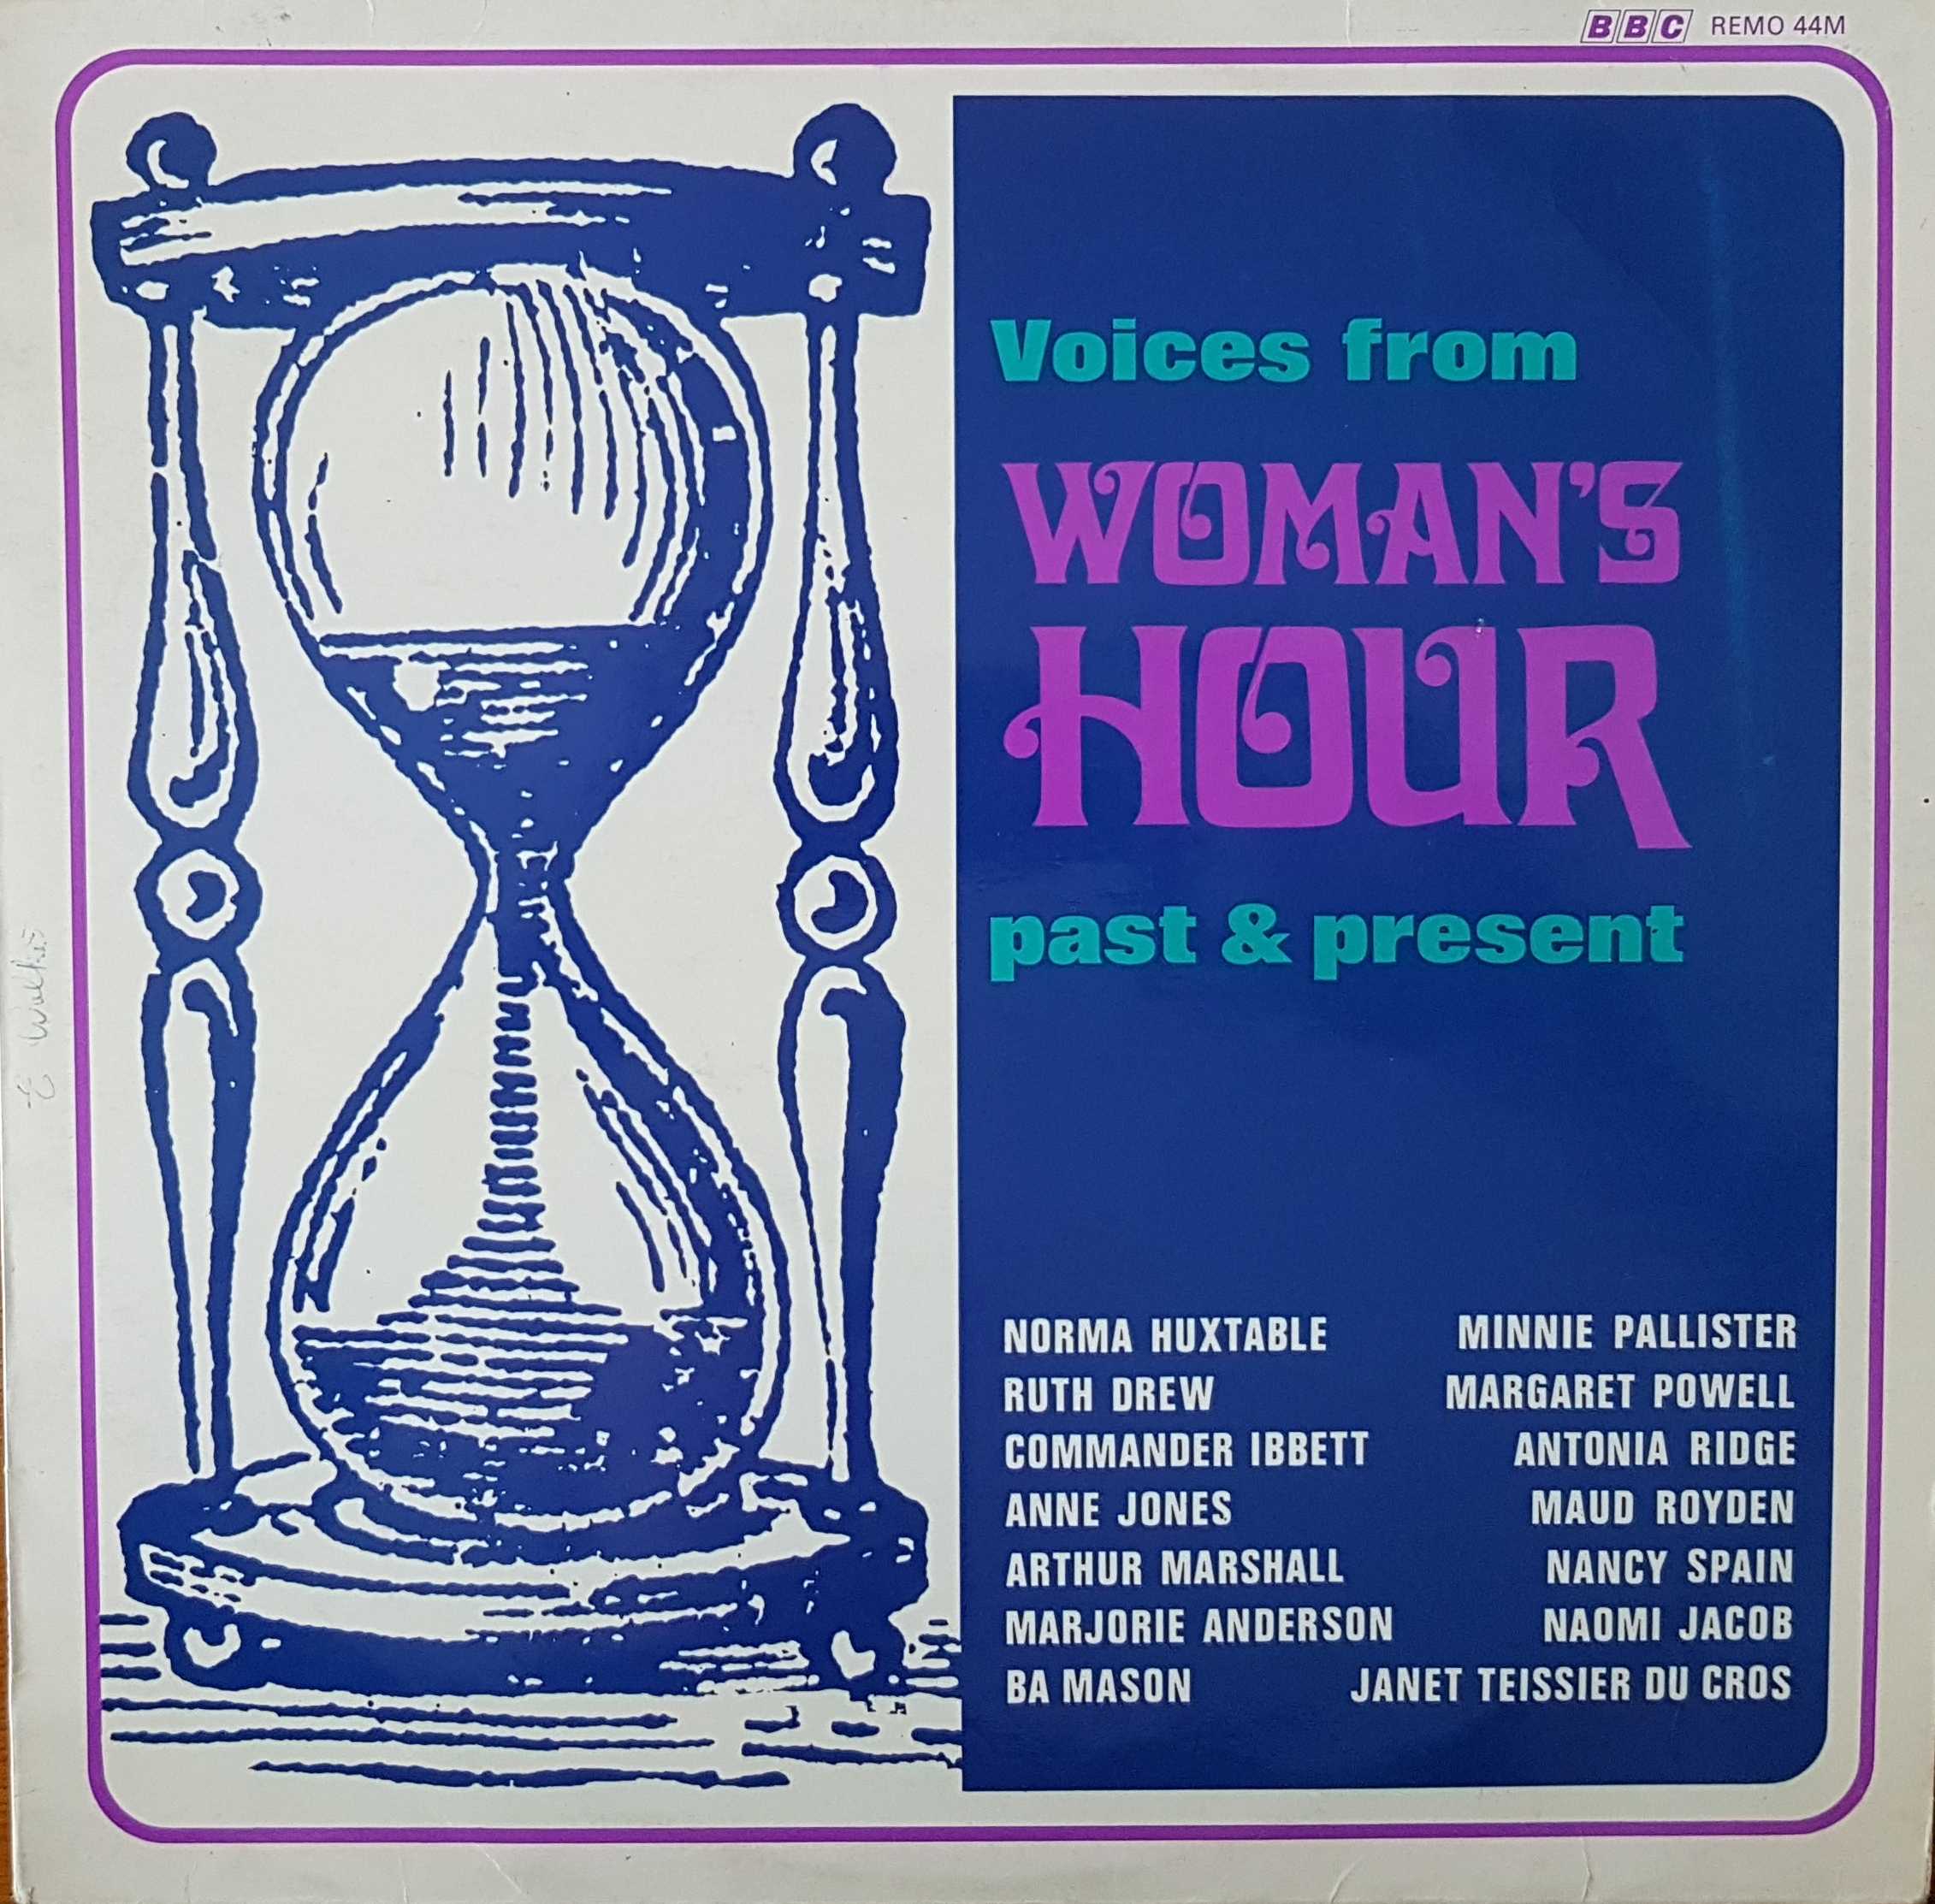 Picture of REMO 44 Voices from Woman's Hour by artist Various from the BBC albums - Records and Tapes library